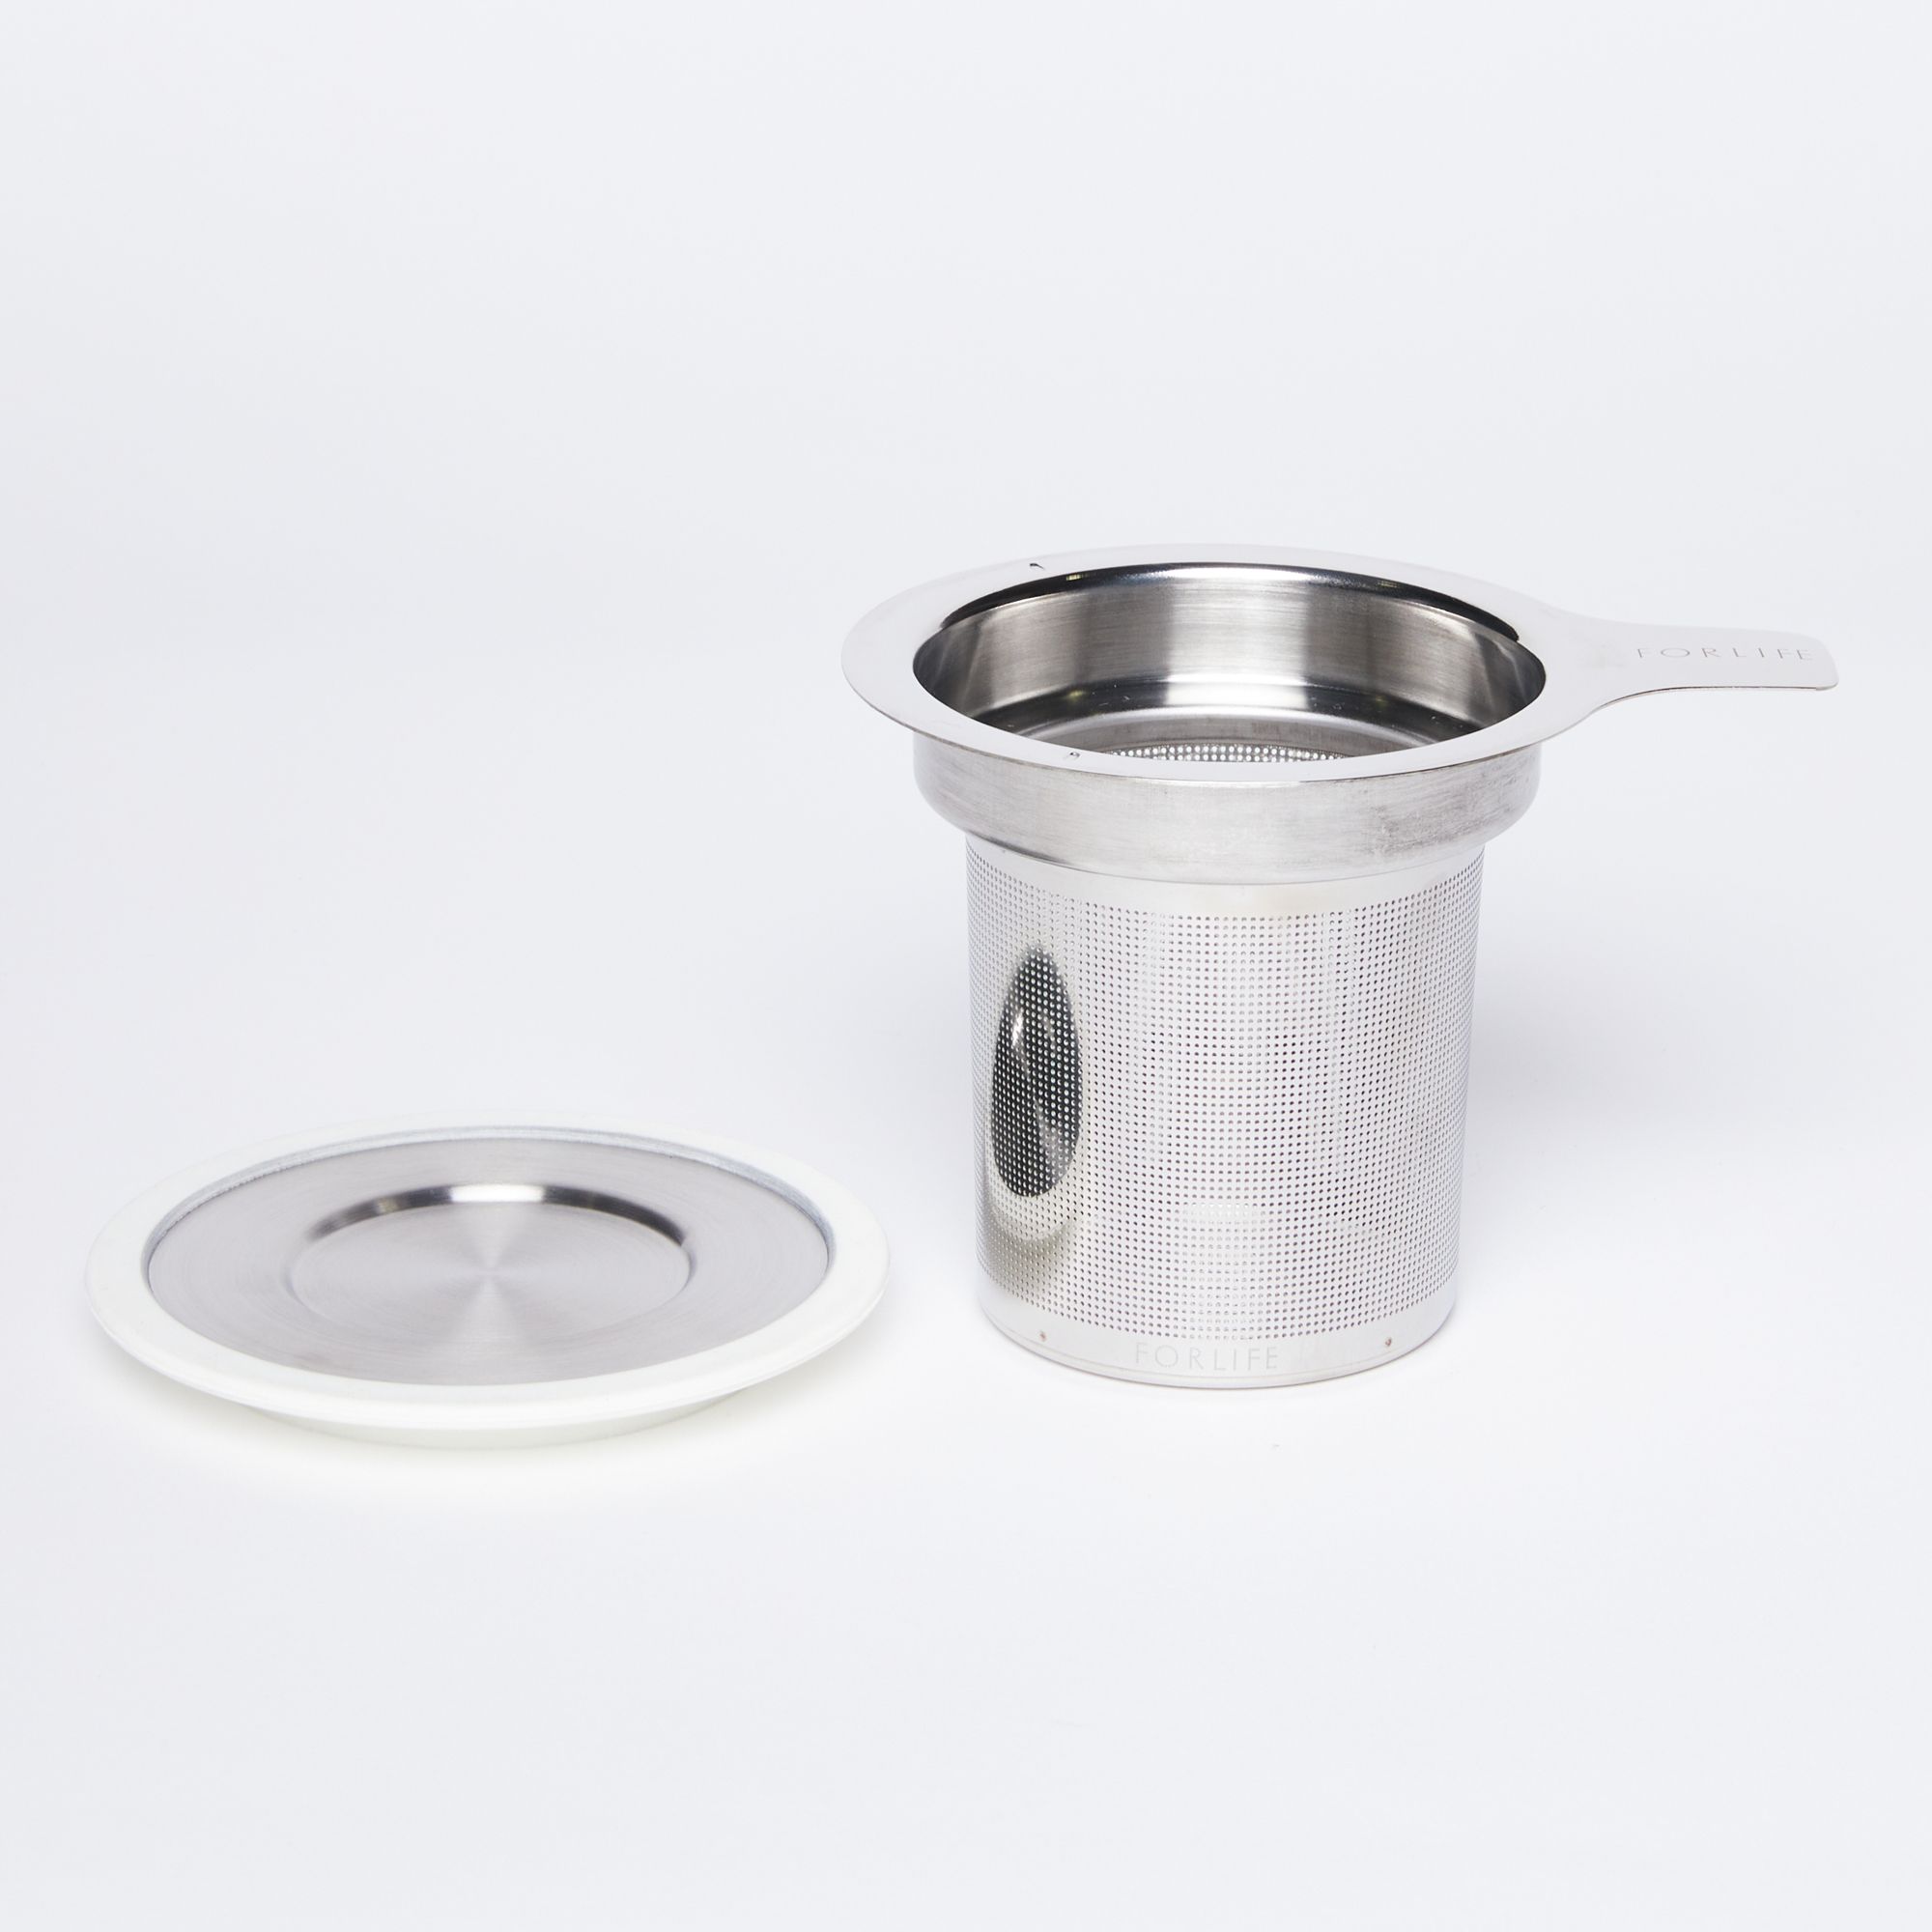 Extra-fine stainless-steel infuser with cylinder base and white silicone lined steel top on the side